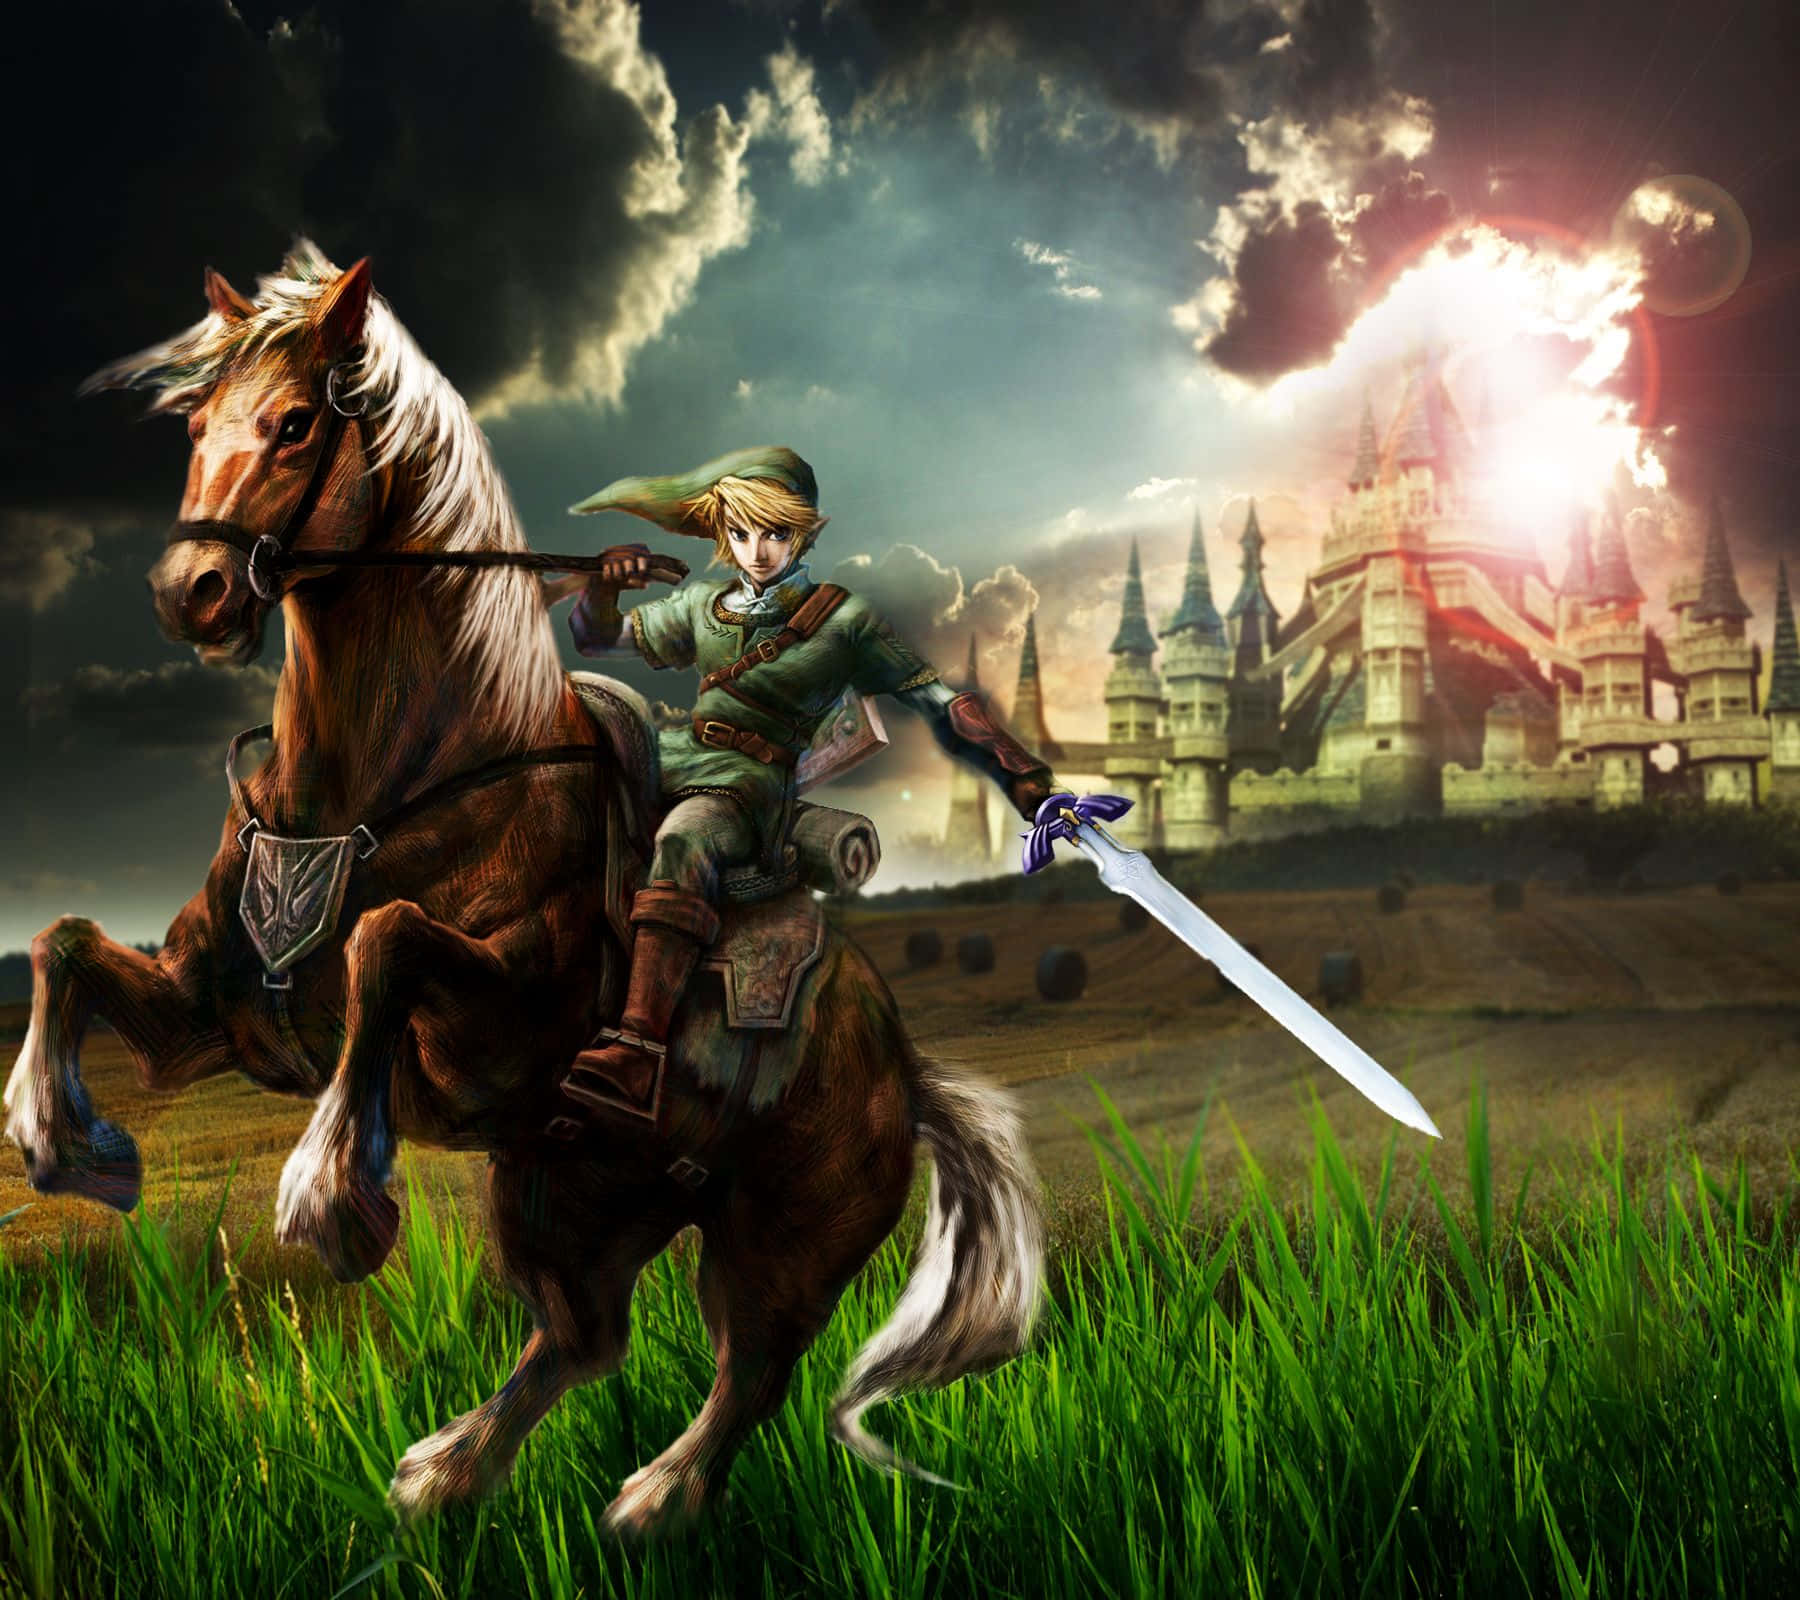 Epona and Link in an epic adventure from The Legend of Zelda Wallpaper